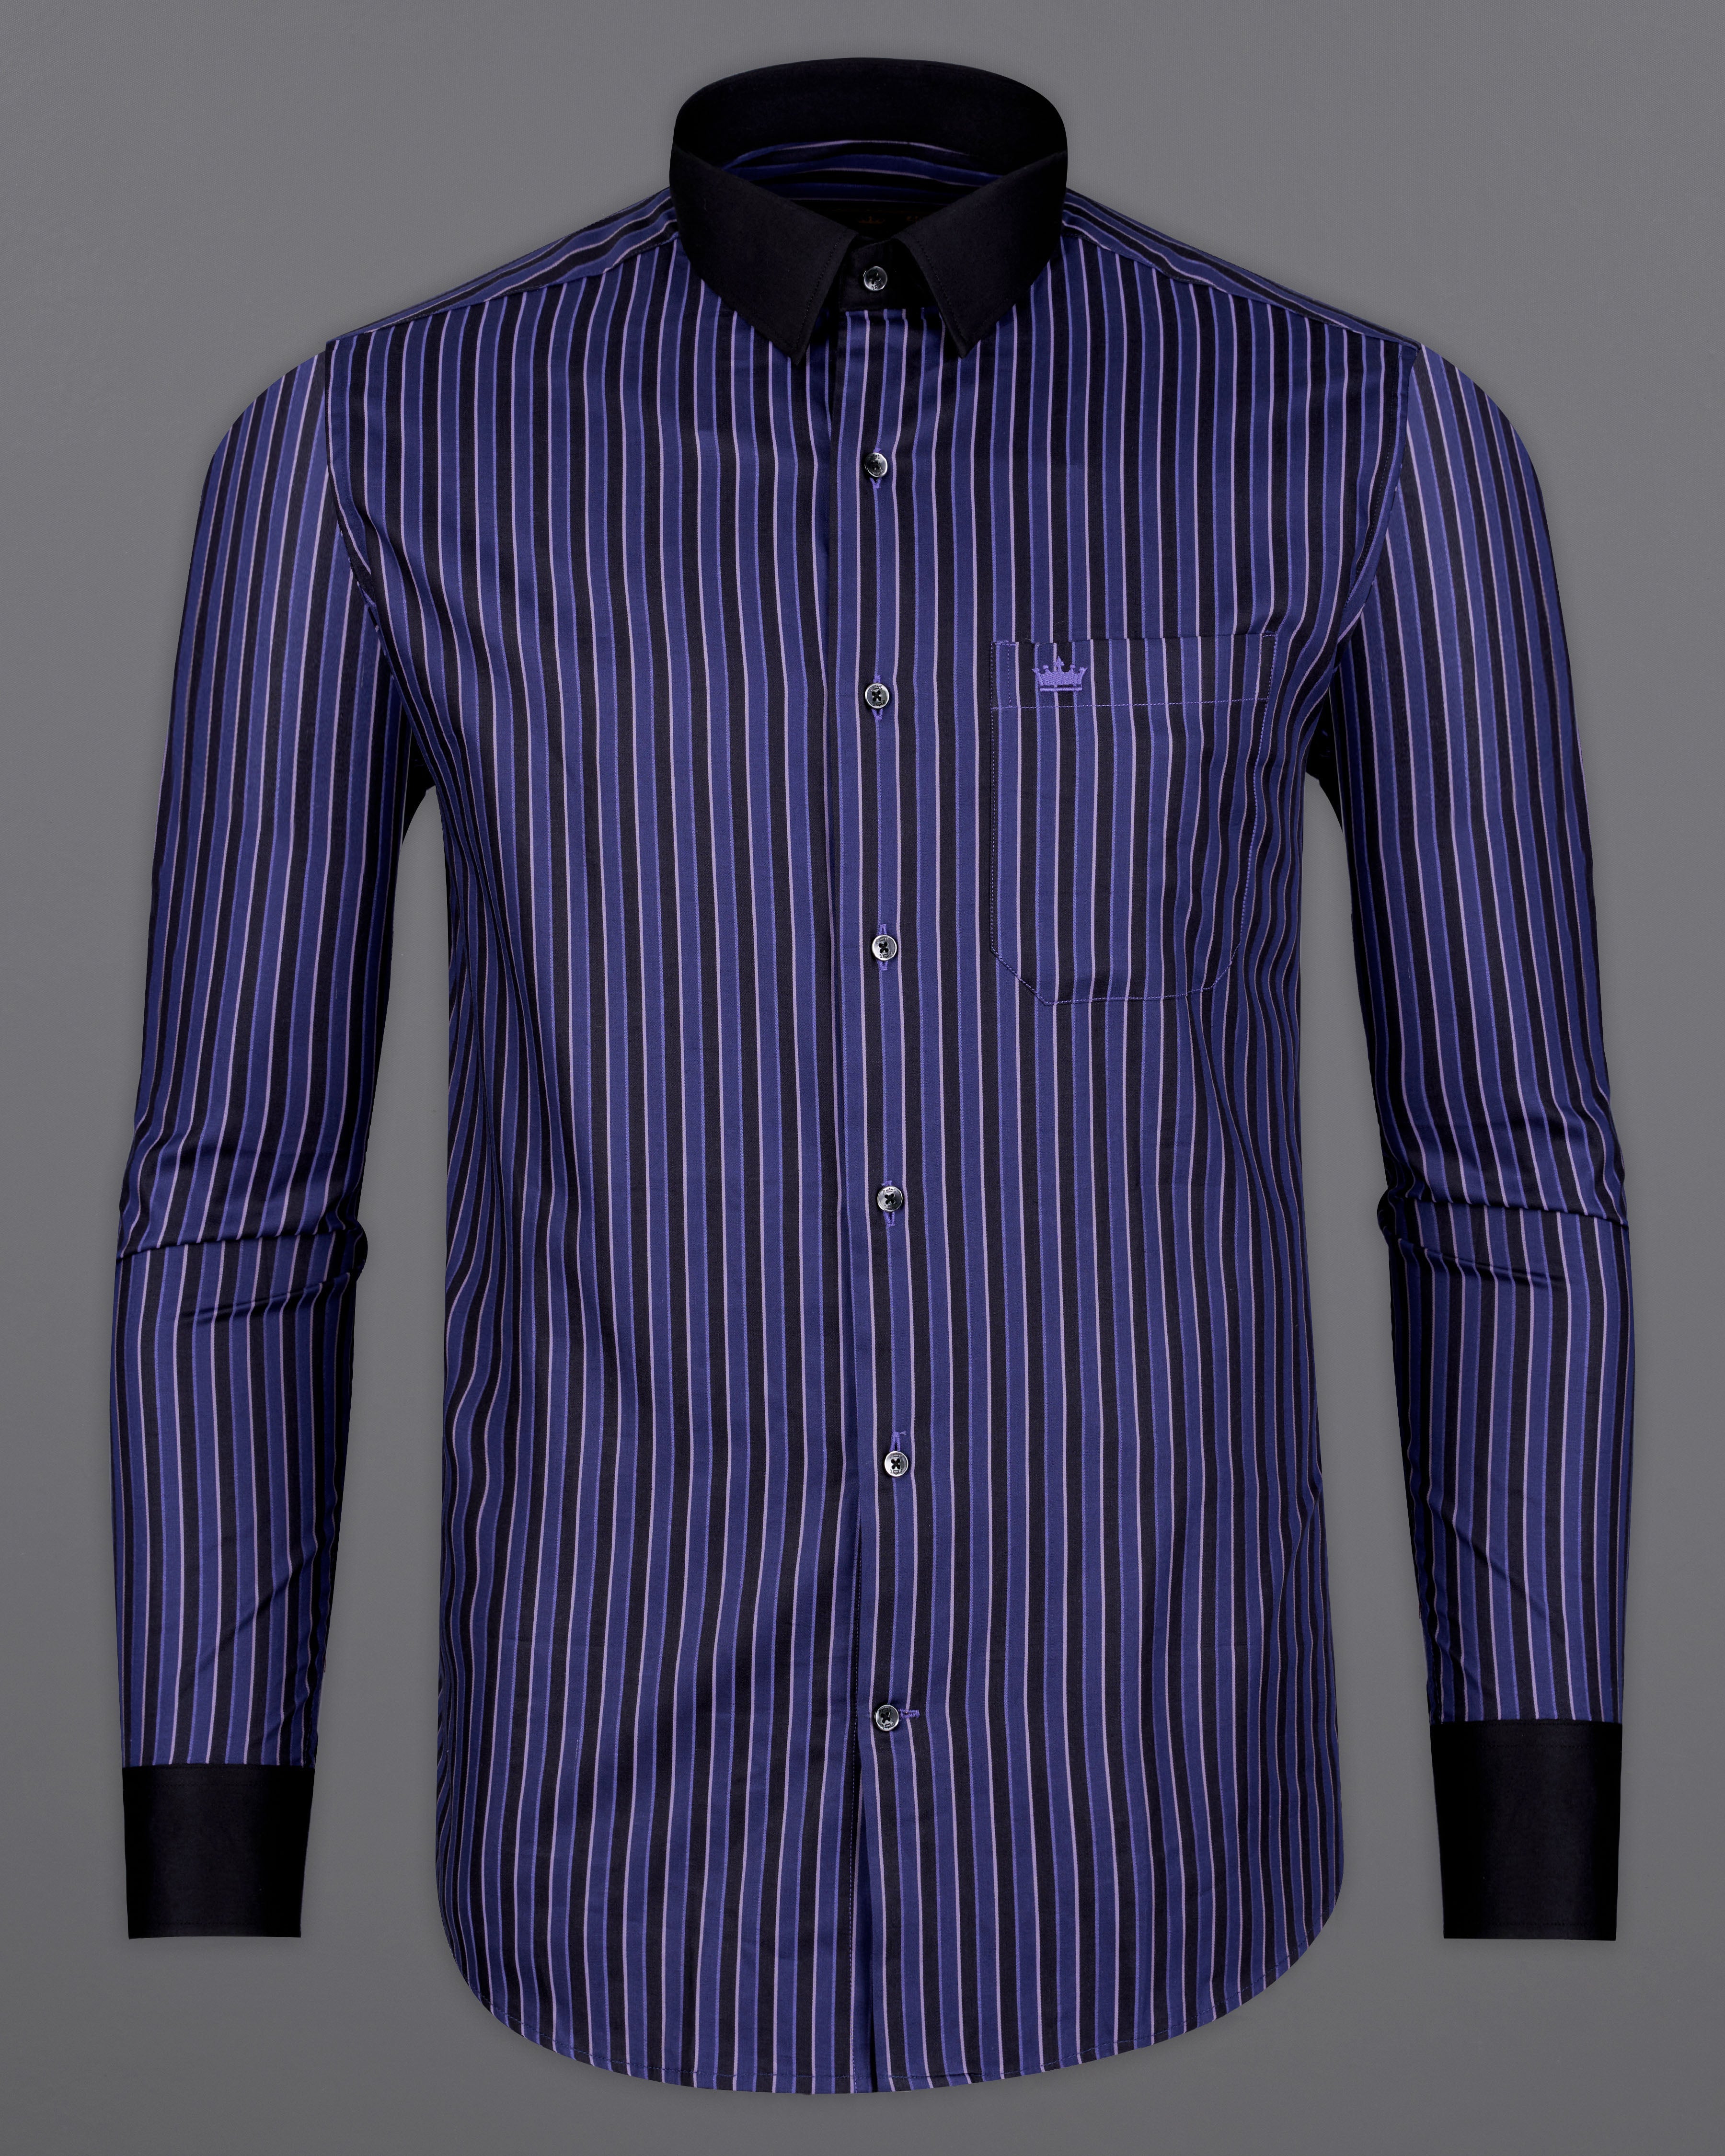 Rhino Blue and and Black Striped Dobby Textured Premium Giza Cotton Shirt 9613-BLK-BCC-38,9613-BLK-BCC-H-38,9613-BLK-BCC-39,9613-BLK-BCC-H-39,9613-BLK-BCC-40,9613-BLK-BCC-H-40,9613-BLK-BCC-42,9613-BLK-BCC-H-42,9613-BLK-BCC-44,9613-BLK-BCC-H-44,9613-BLK-BCC-46,9613-BLK-BCC-H-46,9613-BLK-BCC-48,9613-BLK-BCC-H-48,9613-BLK-BCC-50,9613-BLK-BCC-H-50,9613-BLK-BCC-52,9613-BLK-BCC-H-52